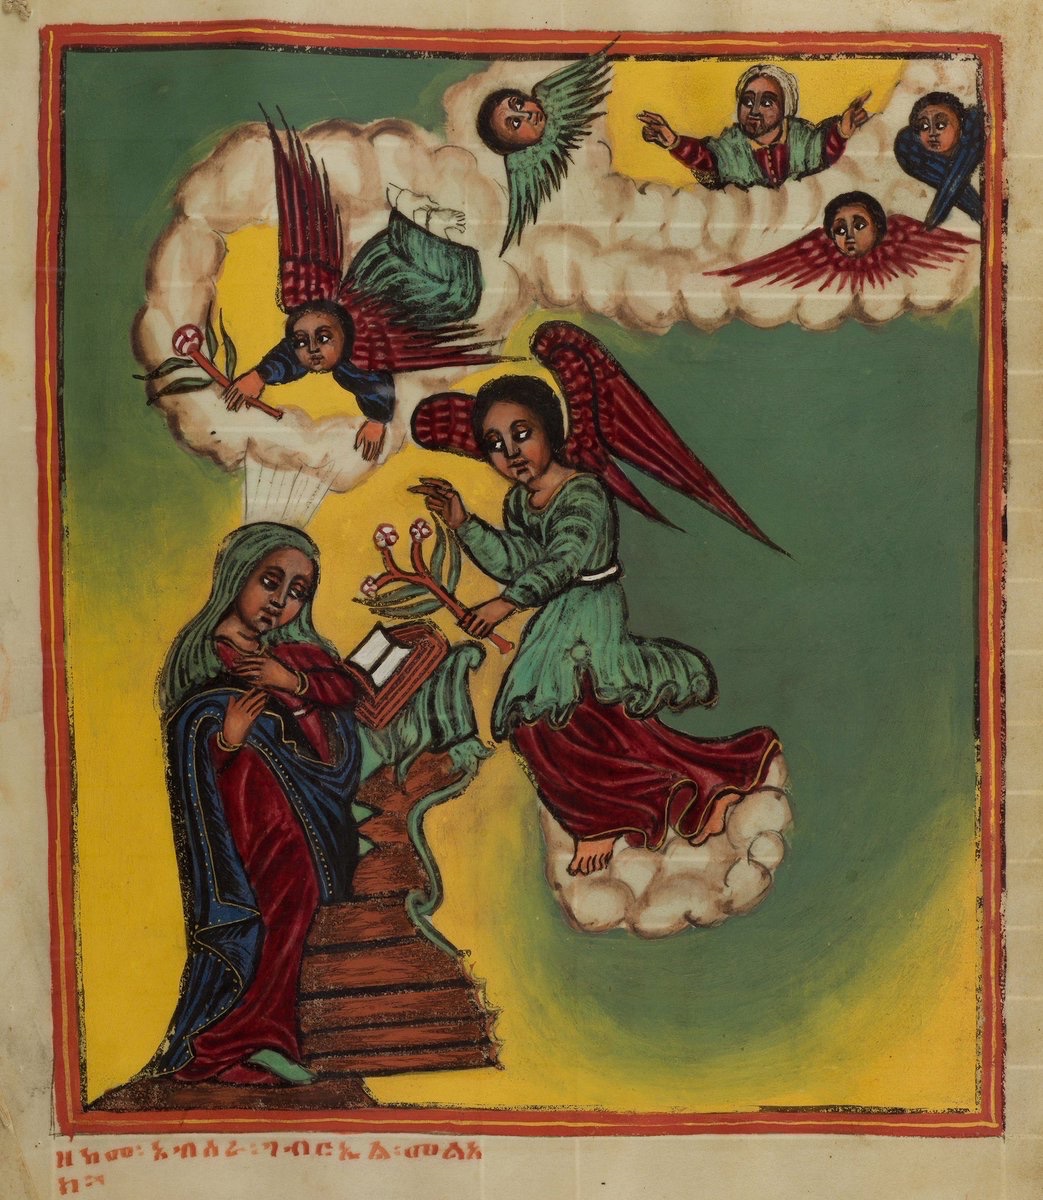 'Oh, flowers? For little ol' me?'

Ethiopia, 17th–18th c.   #StMary #annunciation #flowers #gabriel #africanart